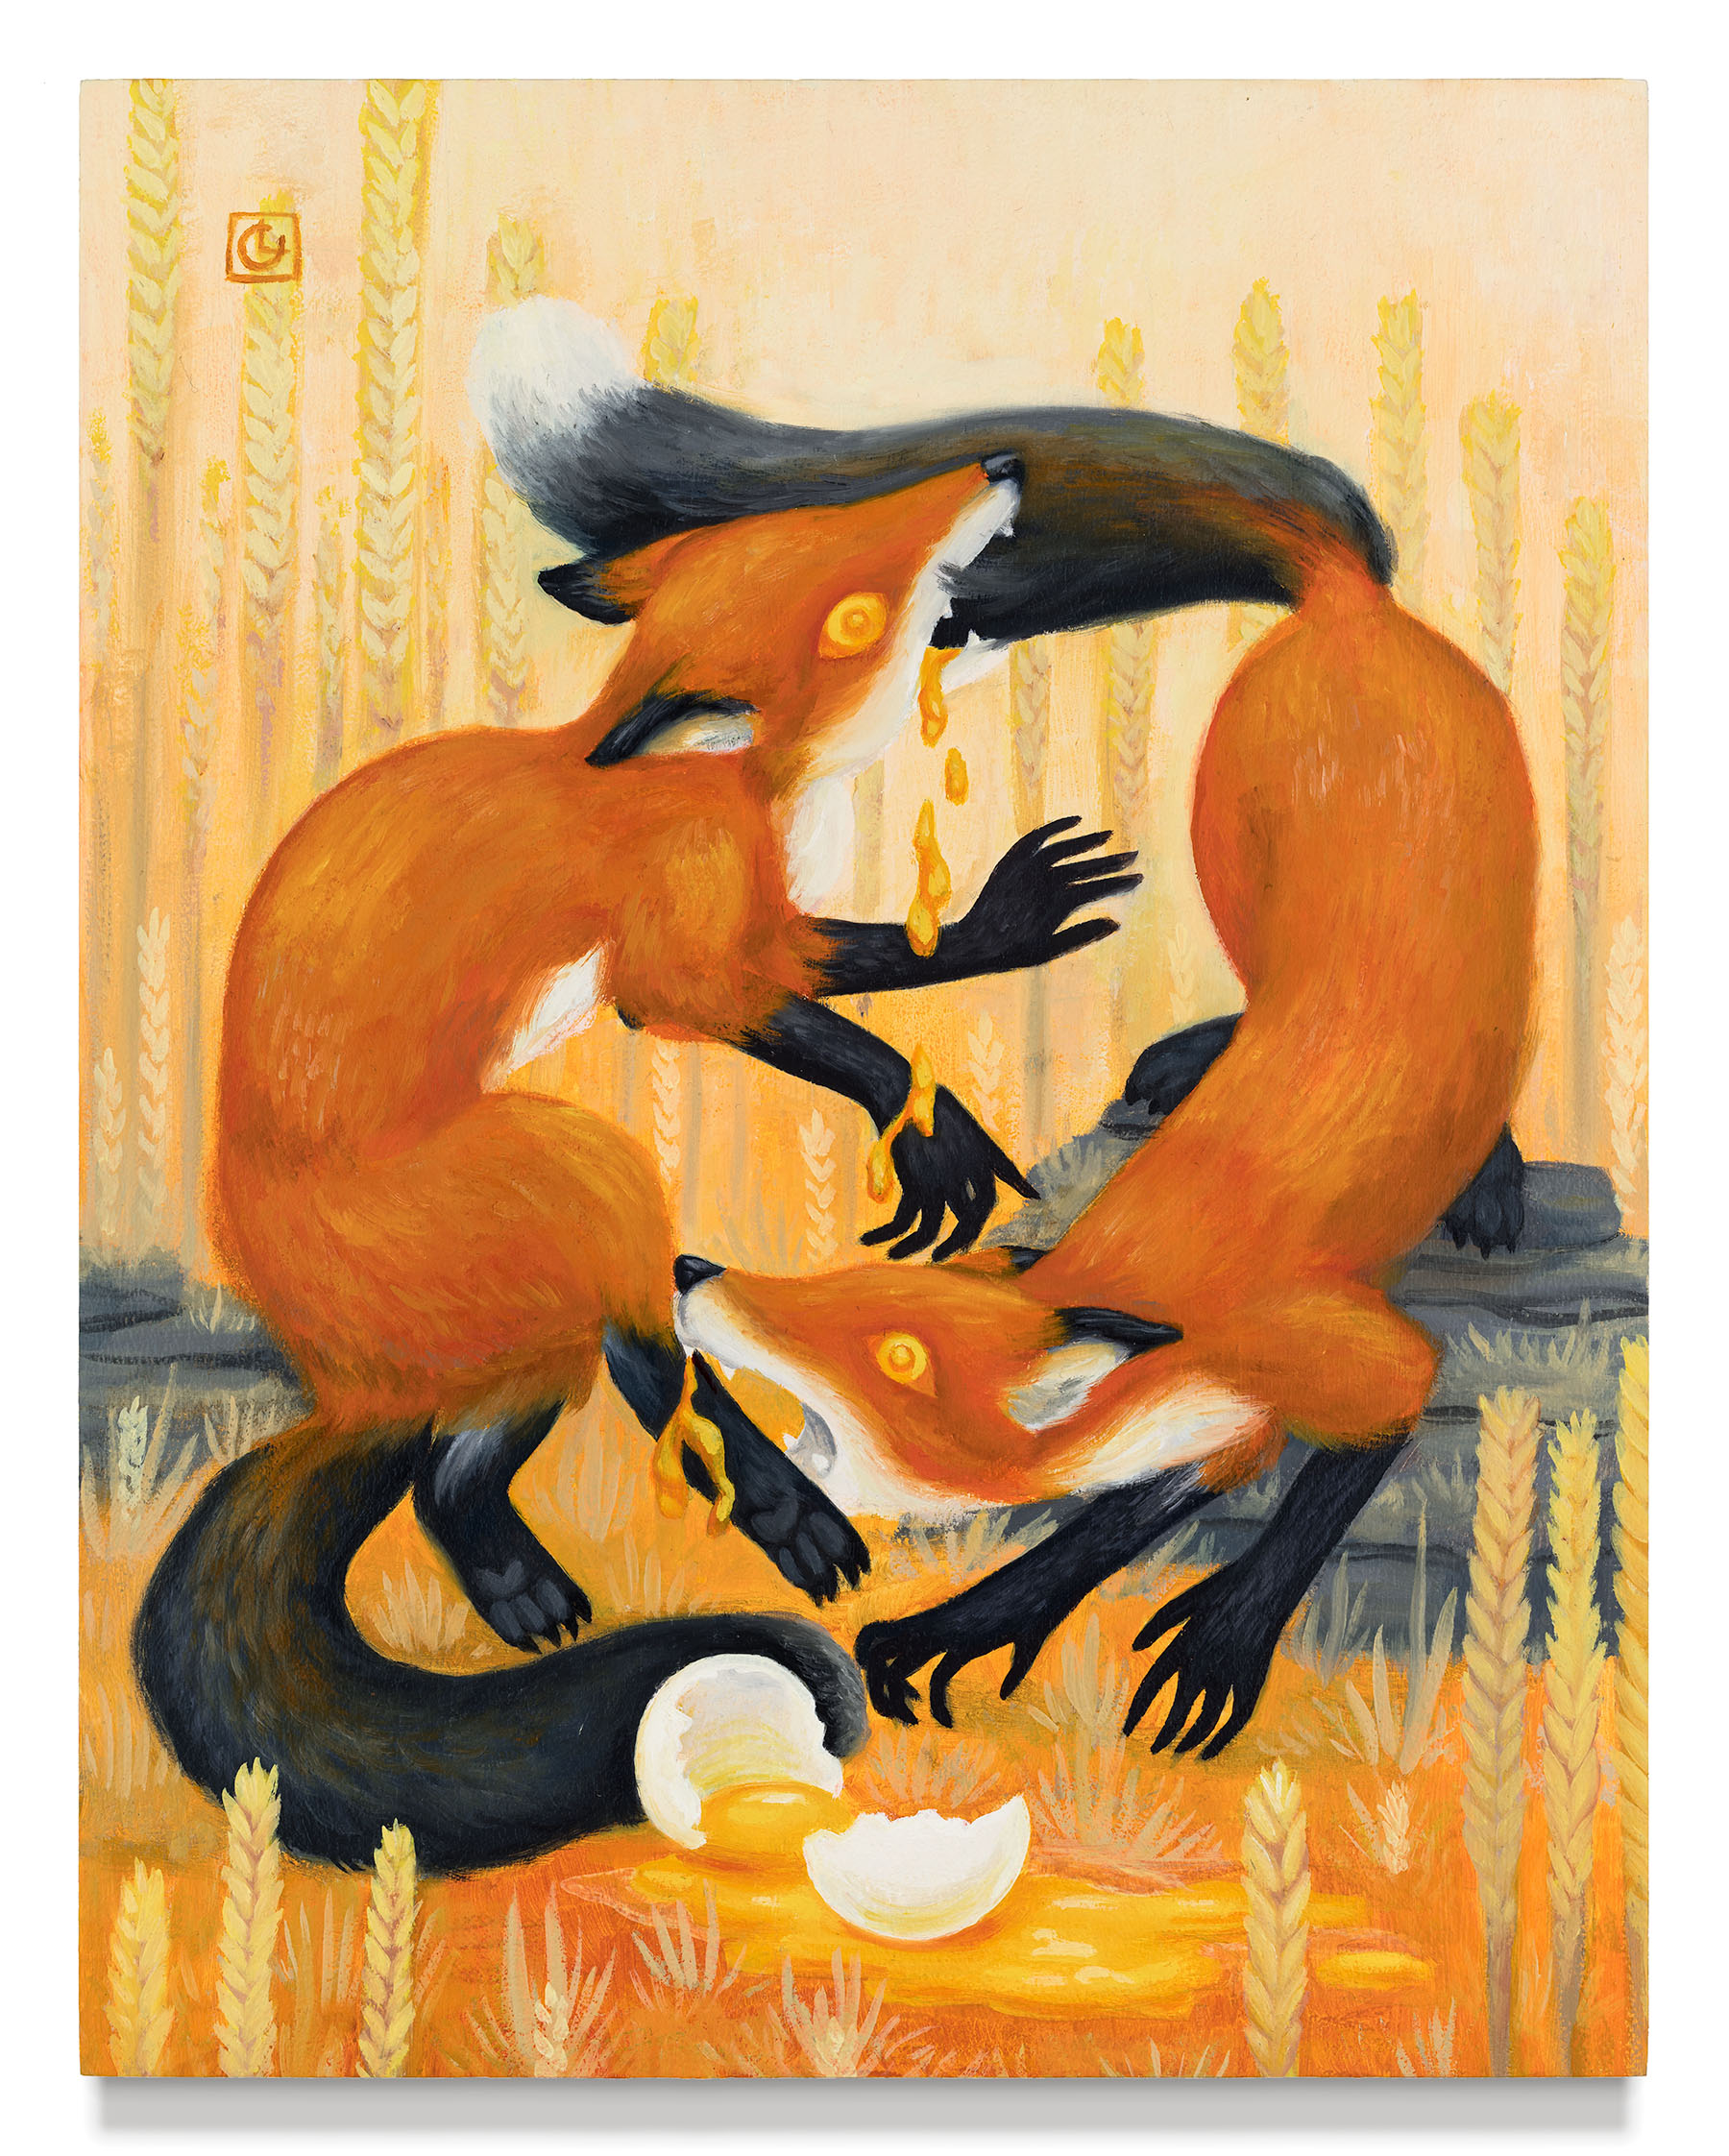 painting of two foxes attacking one another